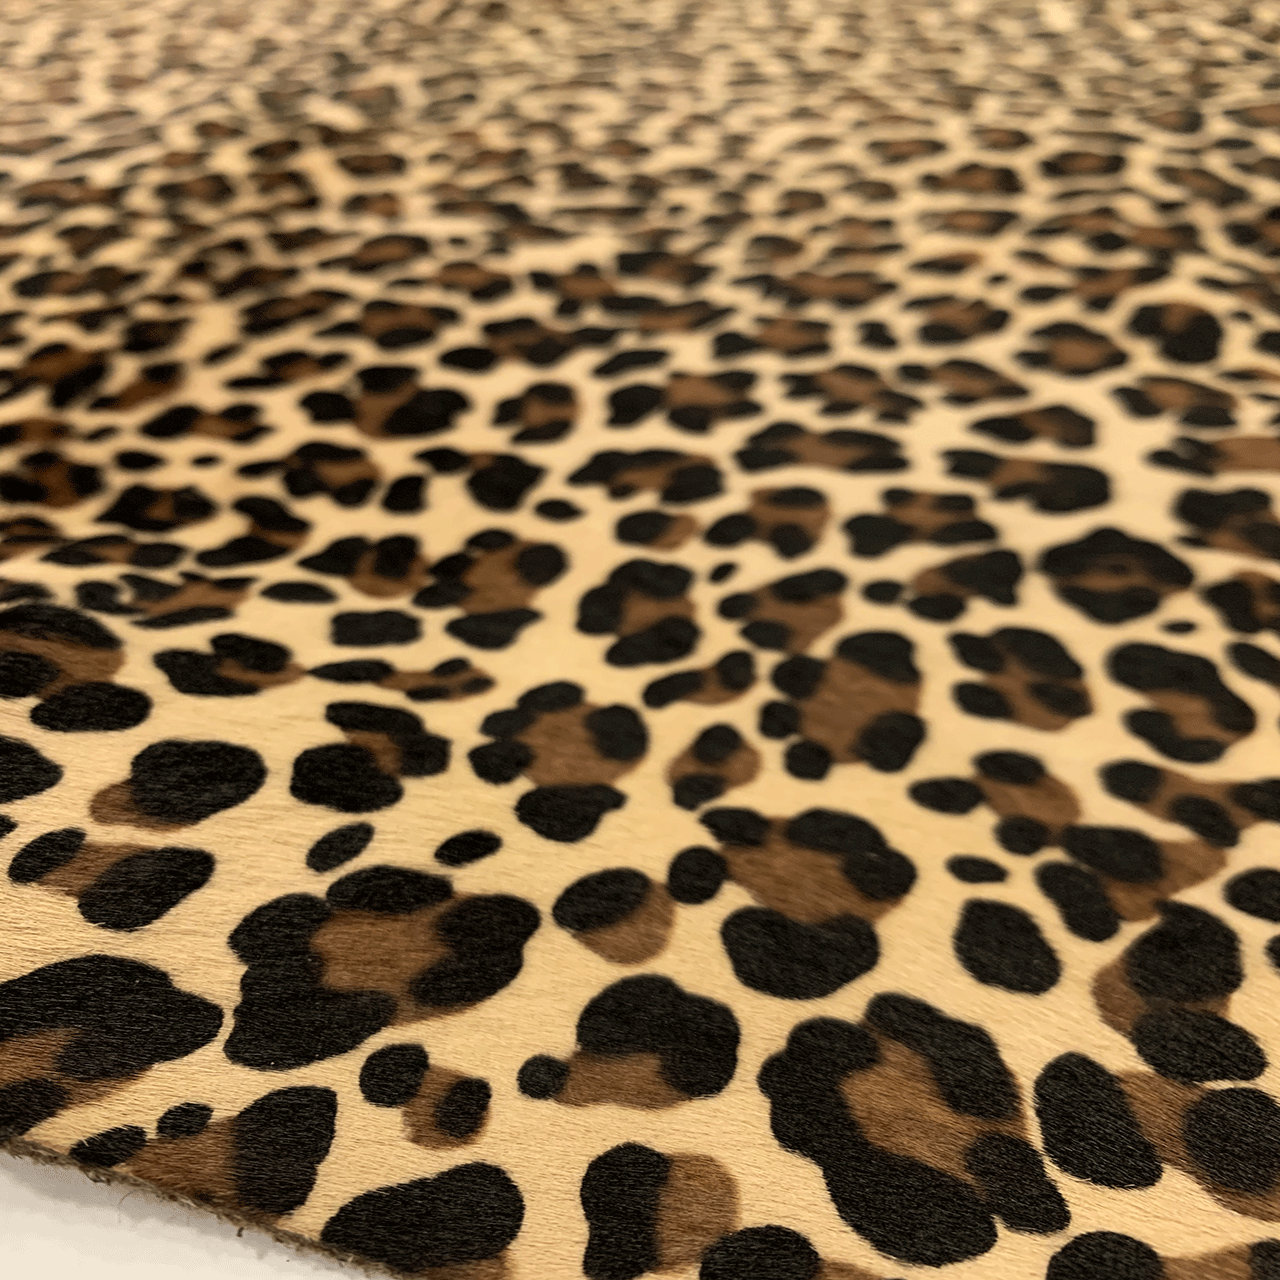 Printed Calfskin Leather For Sale: Italian Hides